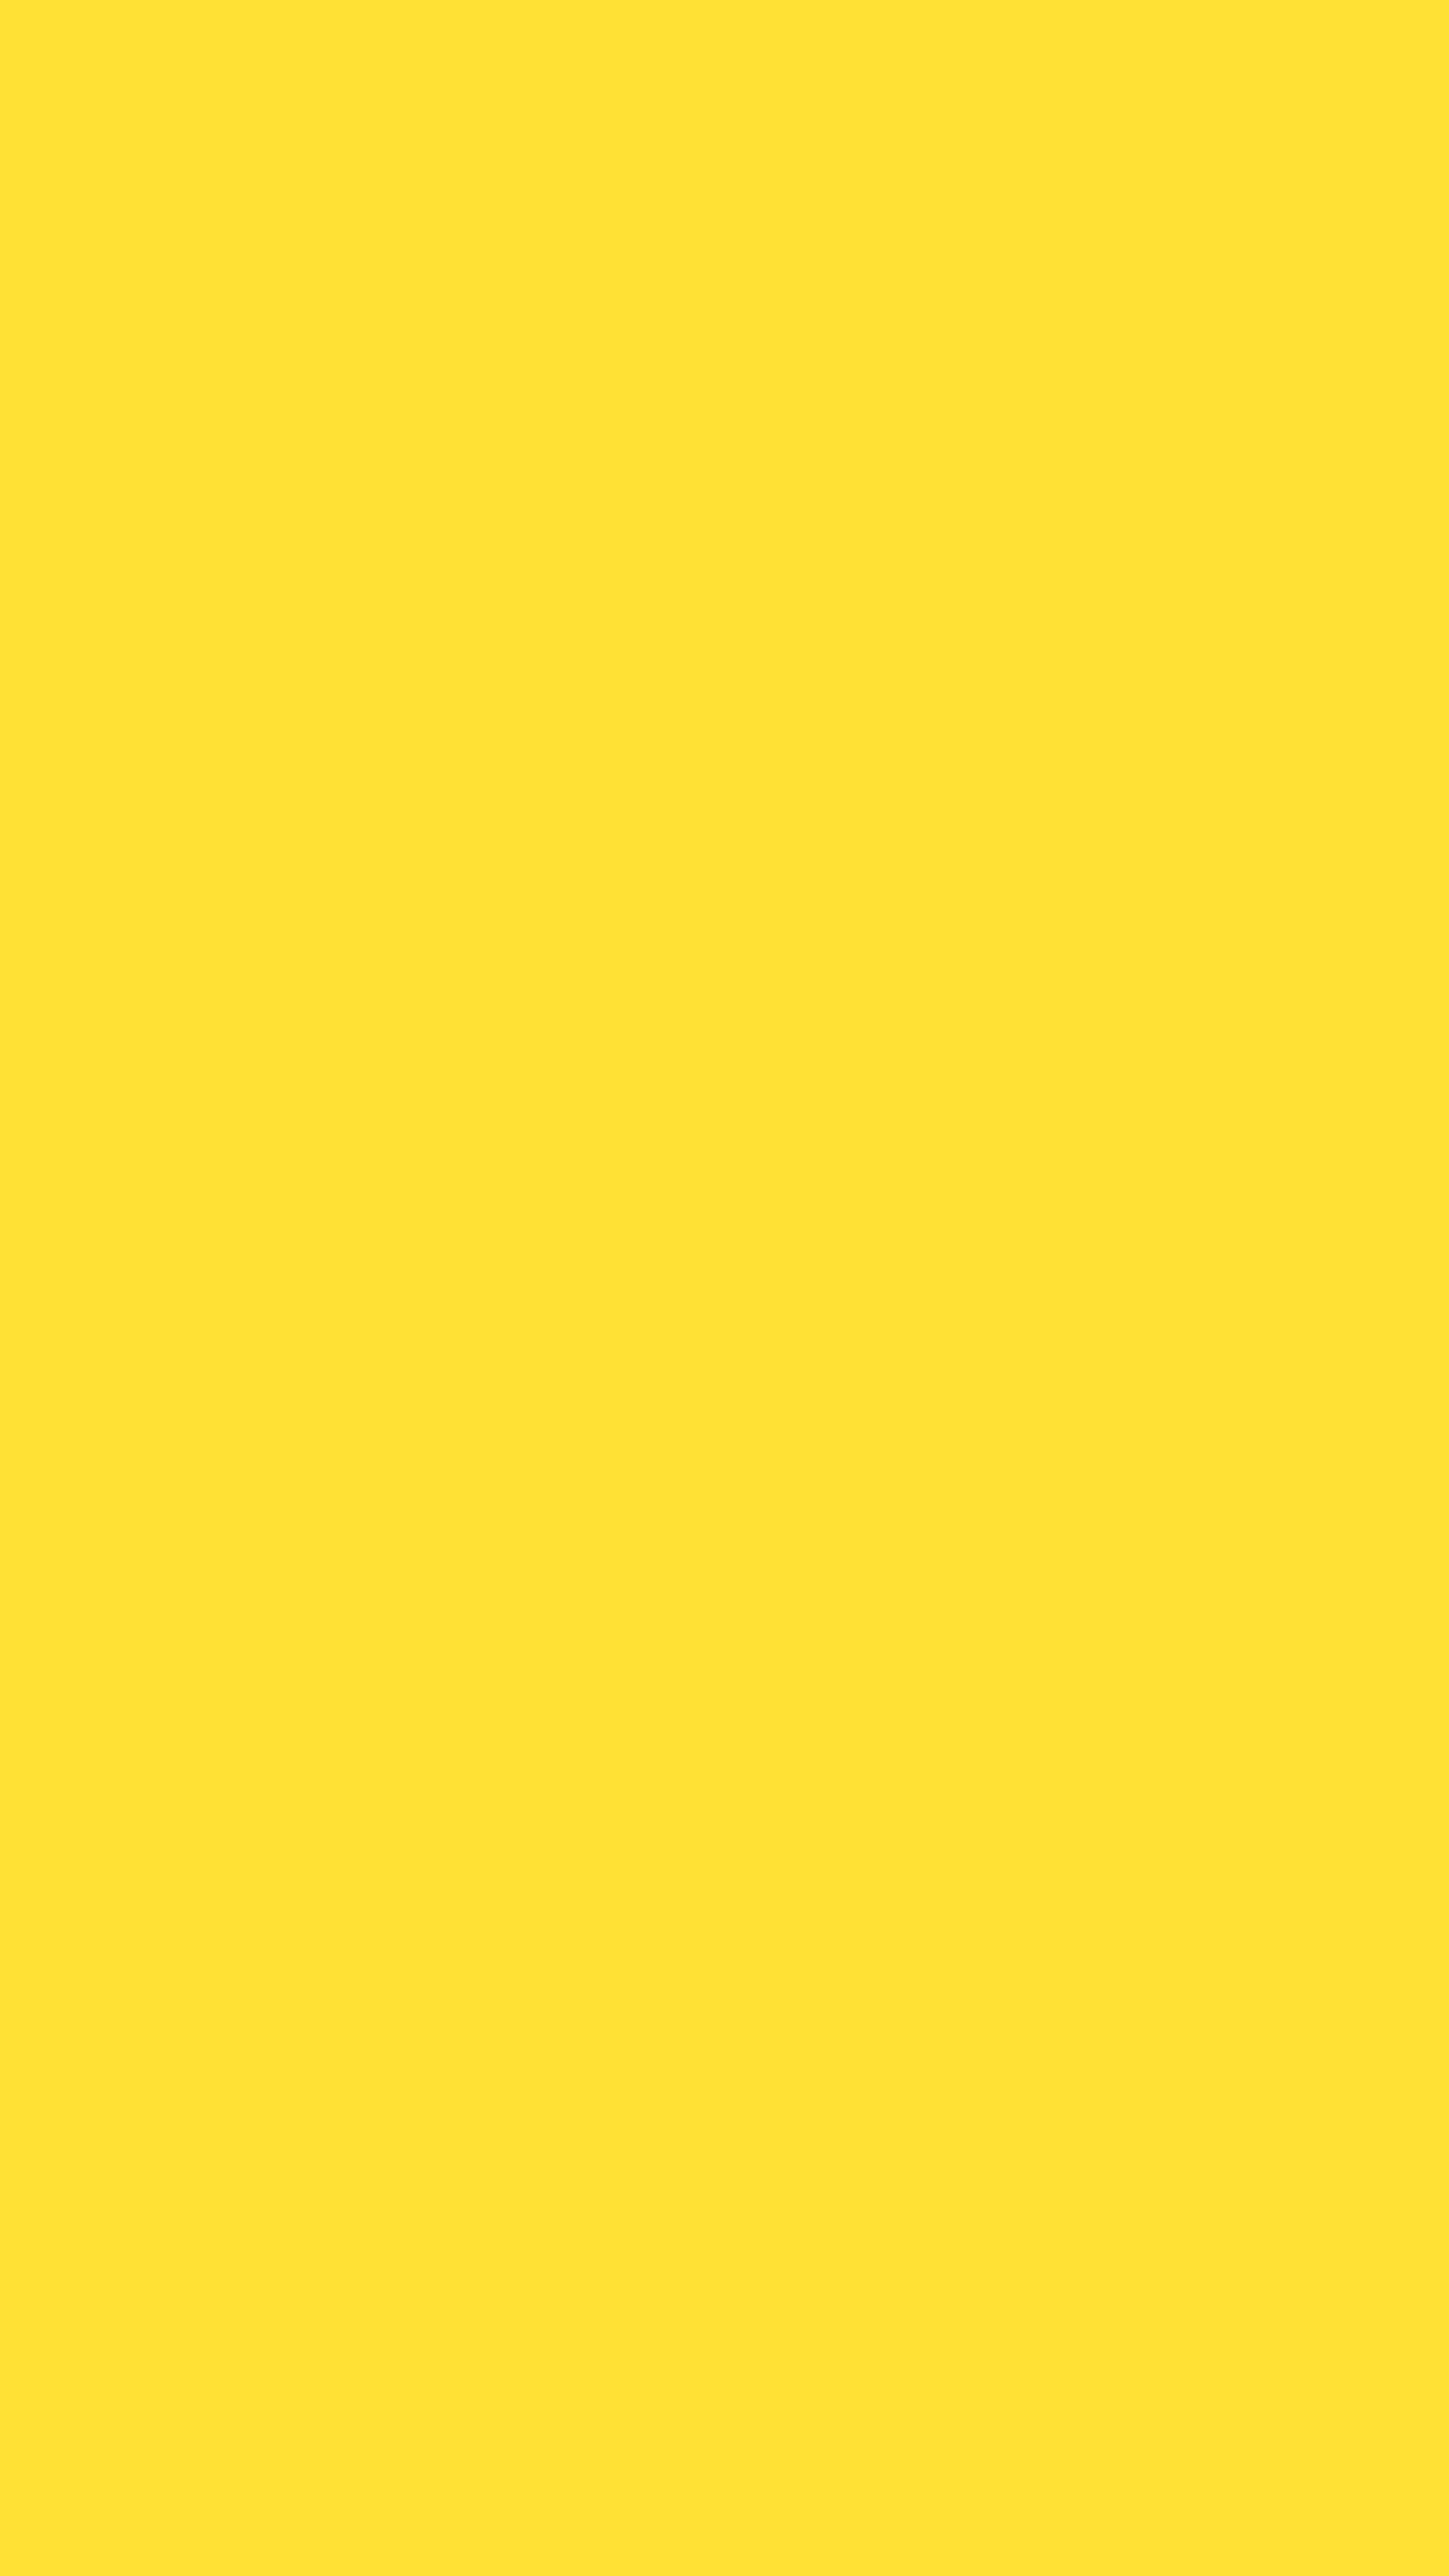 Banana Yellow Solid Color Background Wallpaper For Mobile – Phone -  Chill-out Wallpapers